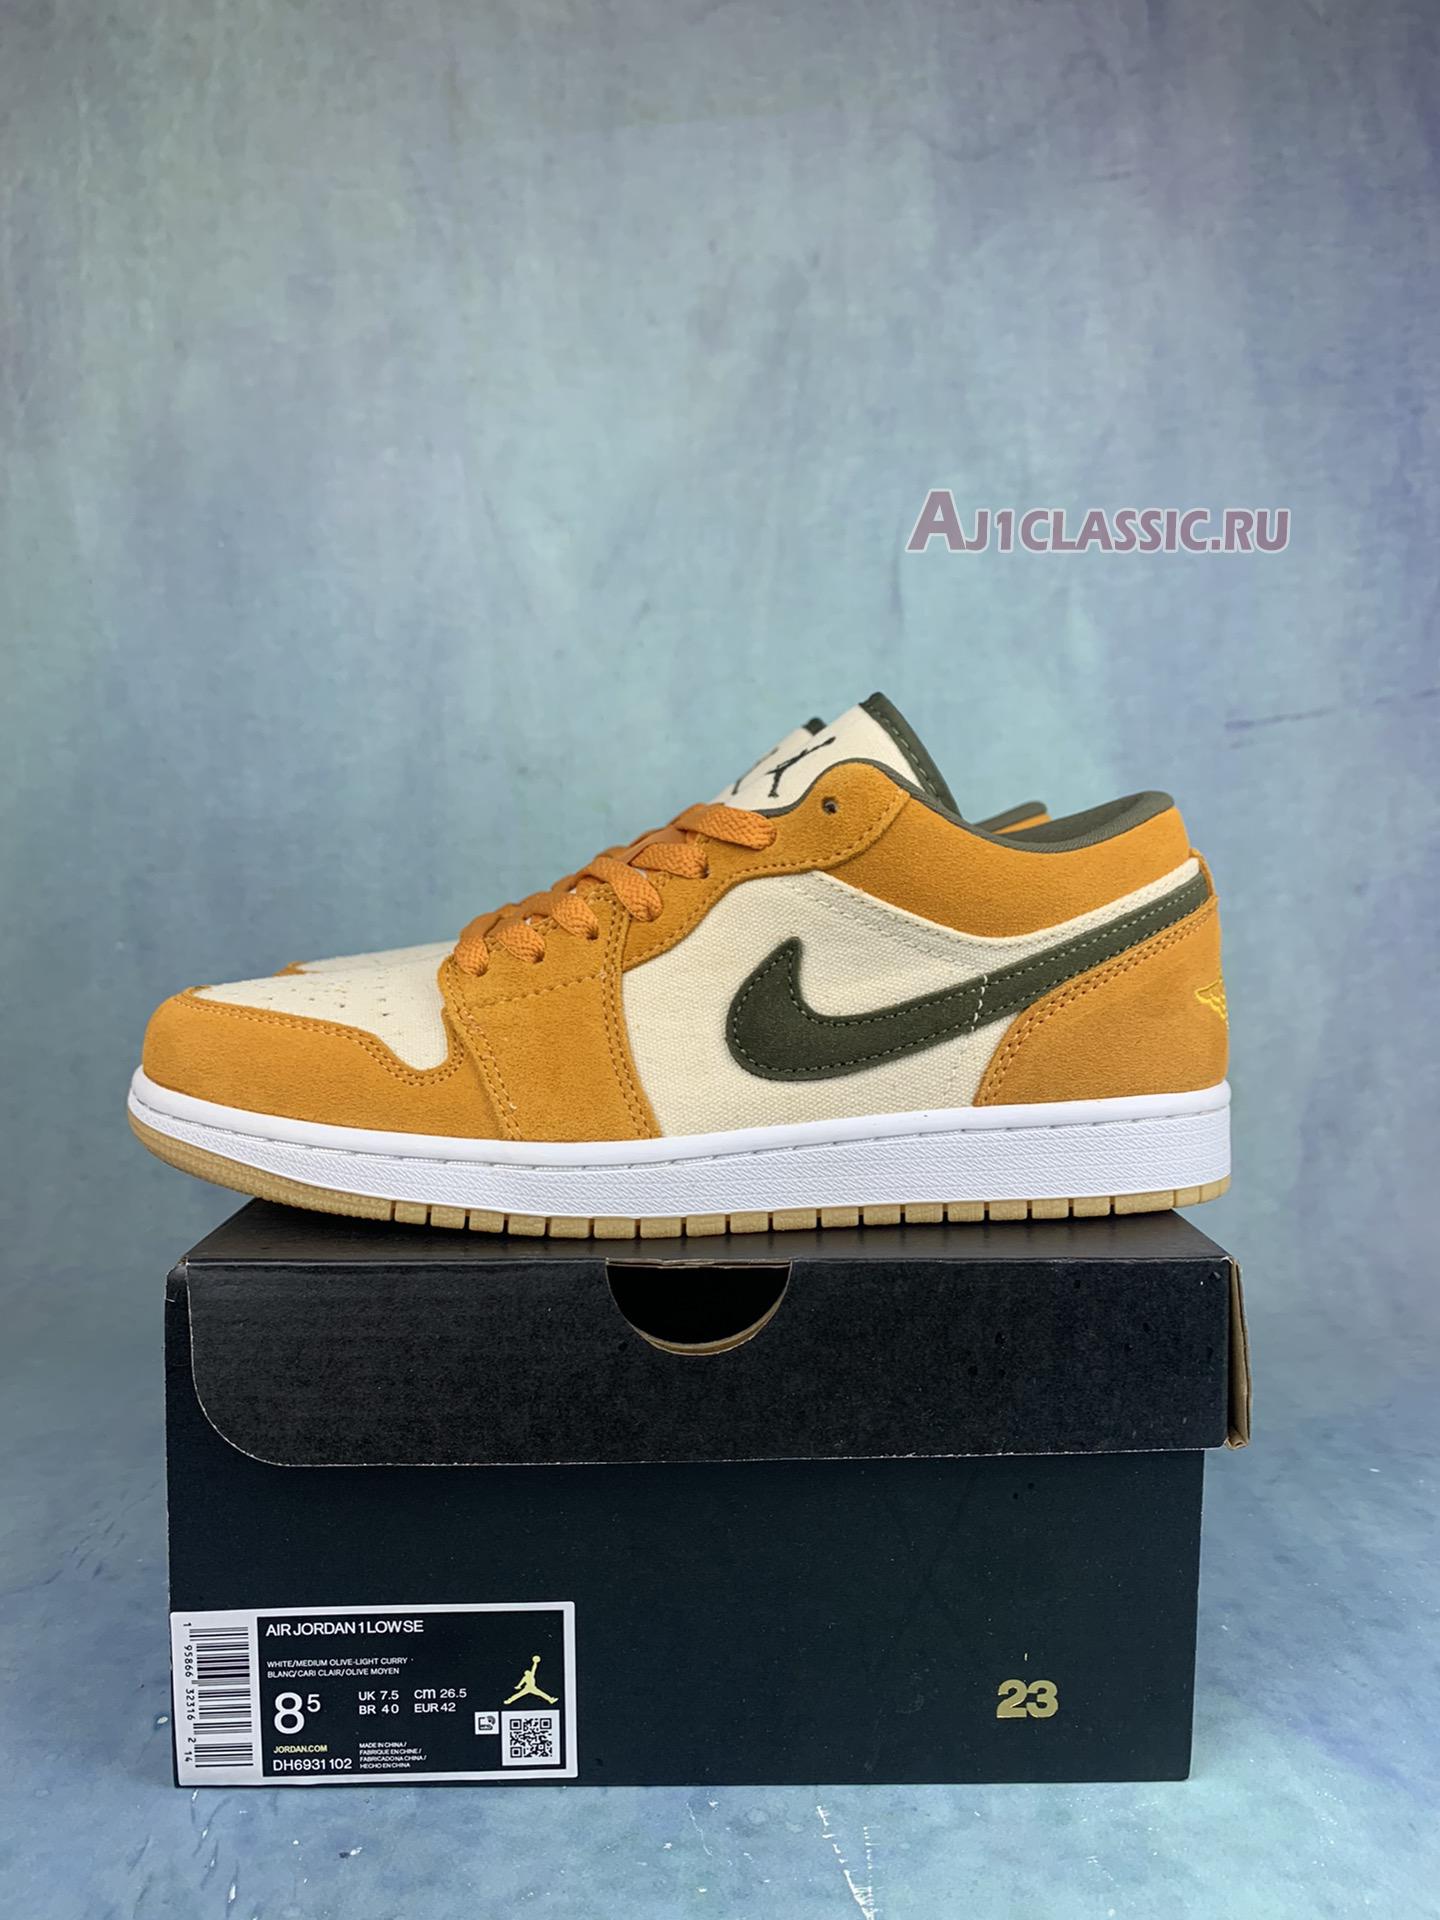 Air Jordan 1 Low SE Light Curry DH6931-102 White/Medium Olive/Light Curry Sneakers